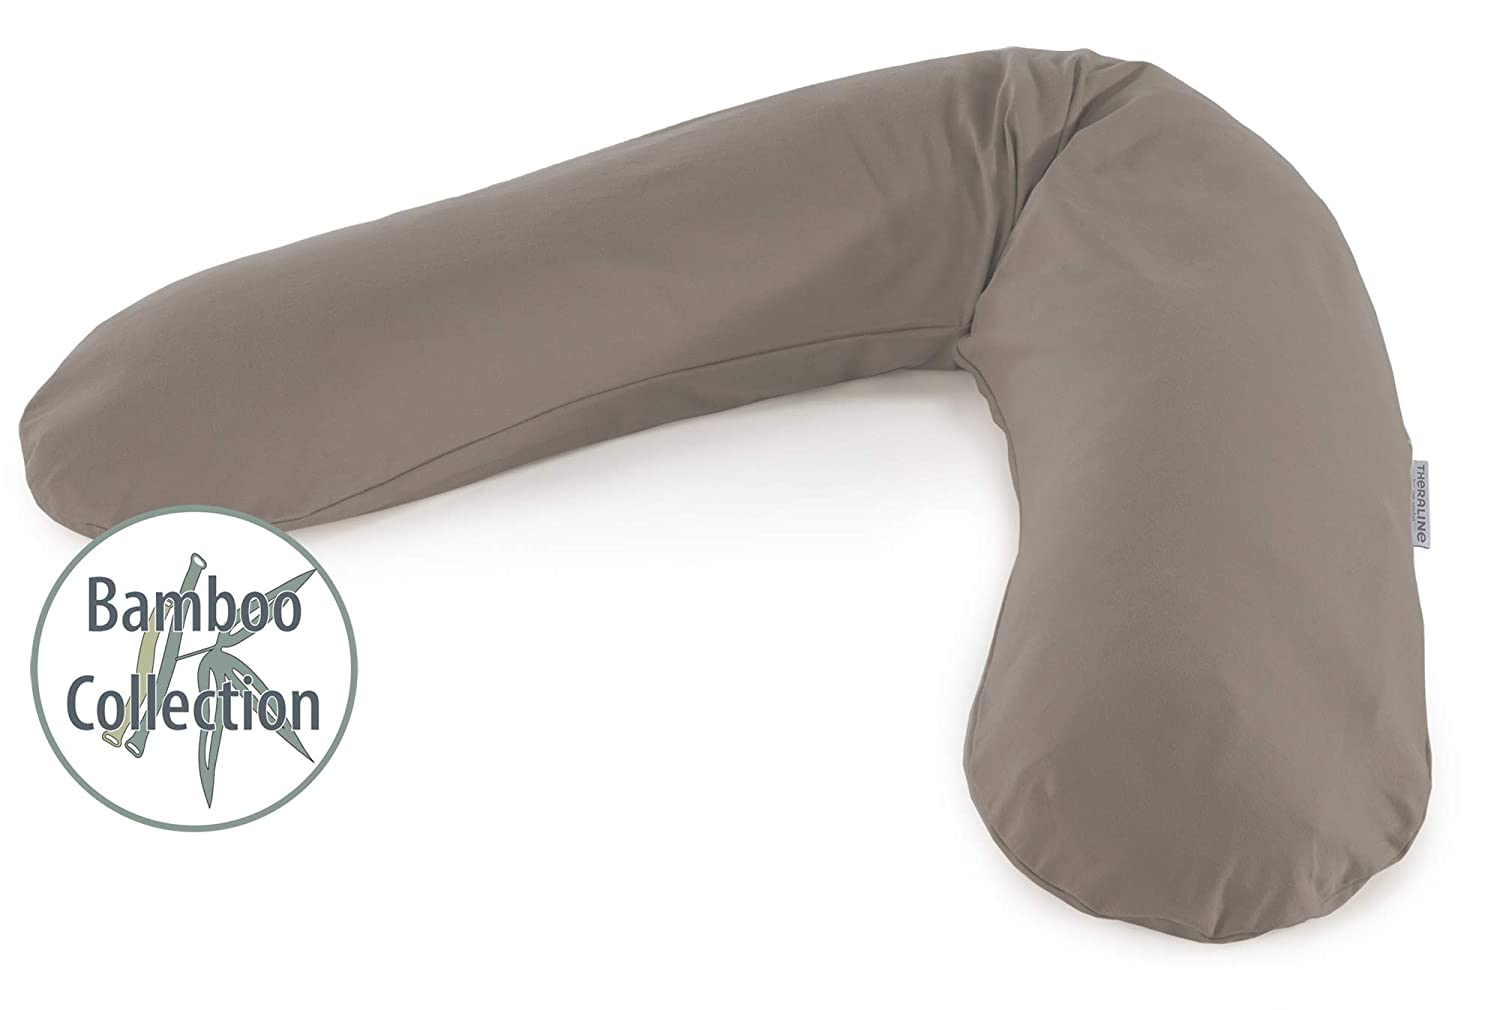 Replacement Cover For The Original Theraline Pregnancy And Nursing Pillow, 100% Cotton. Bamboo Collection Clay grey